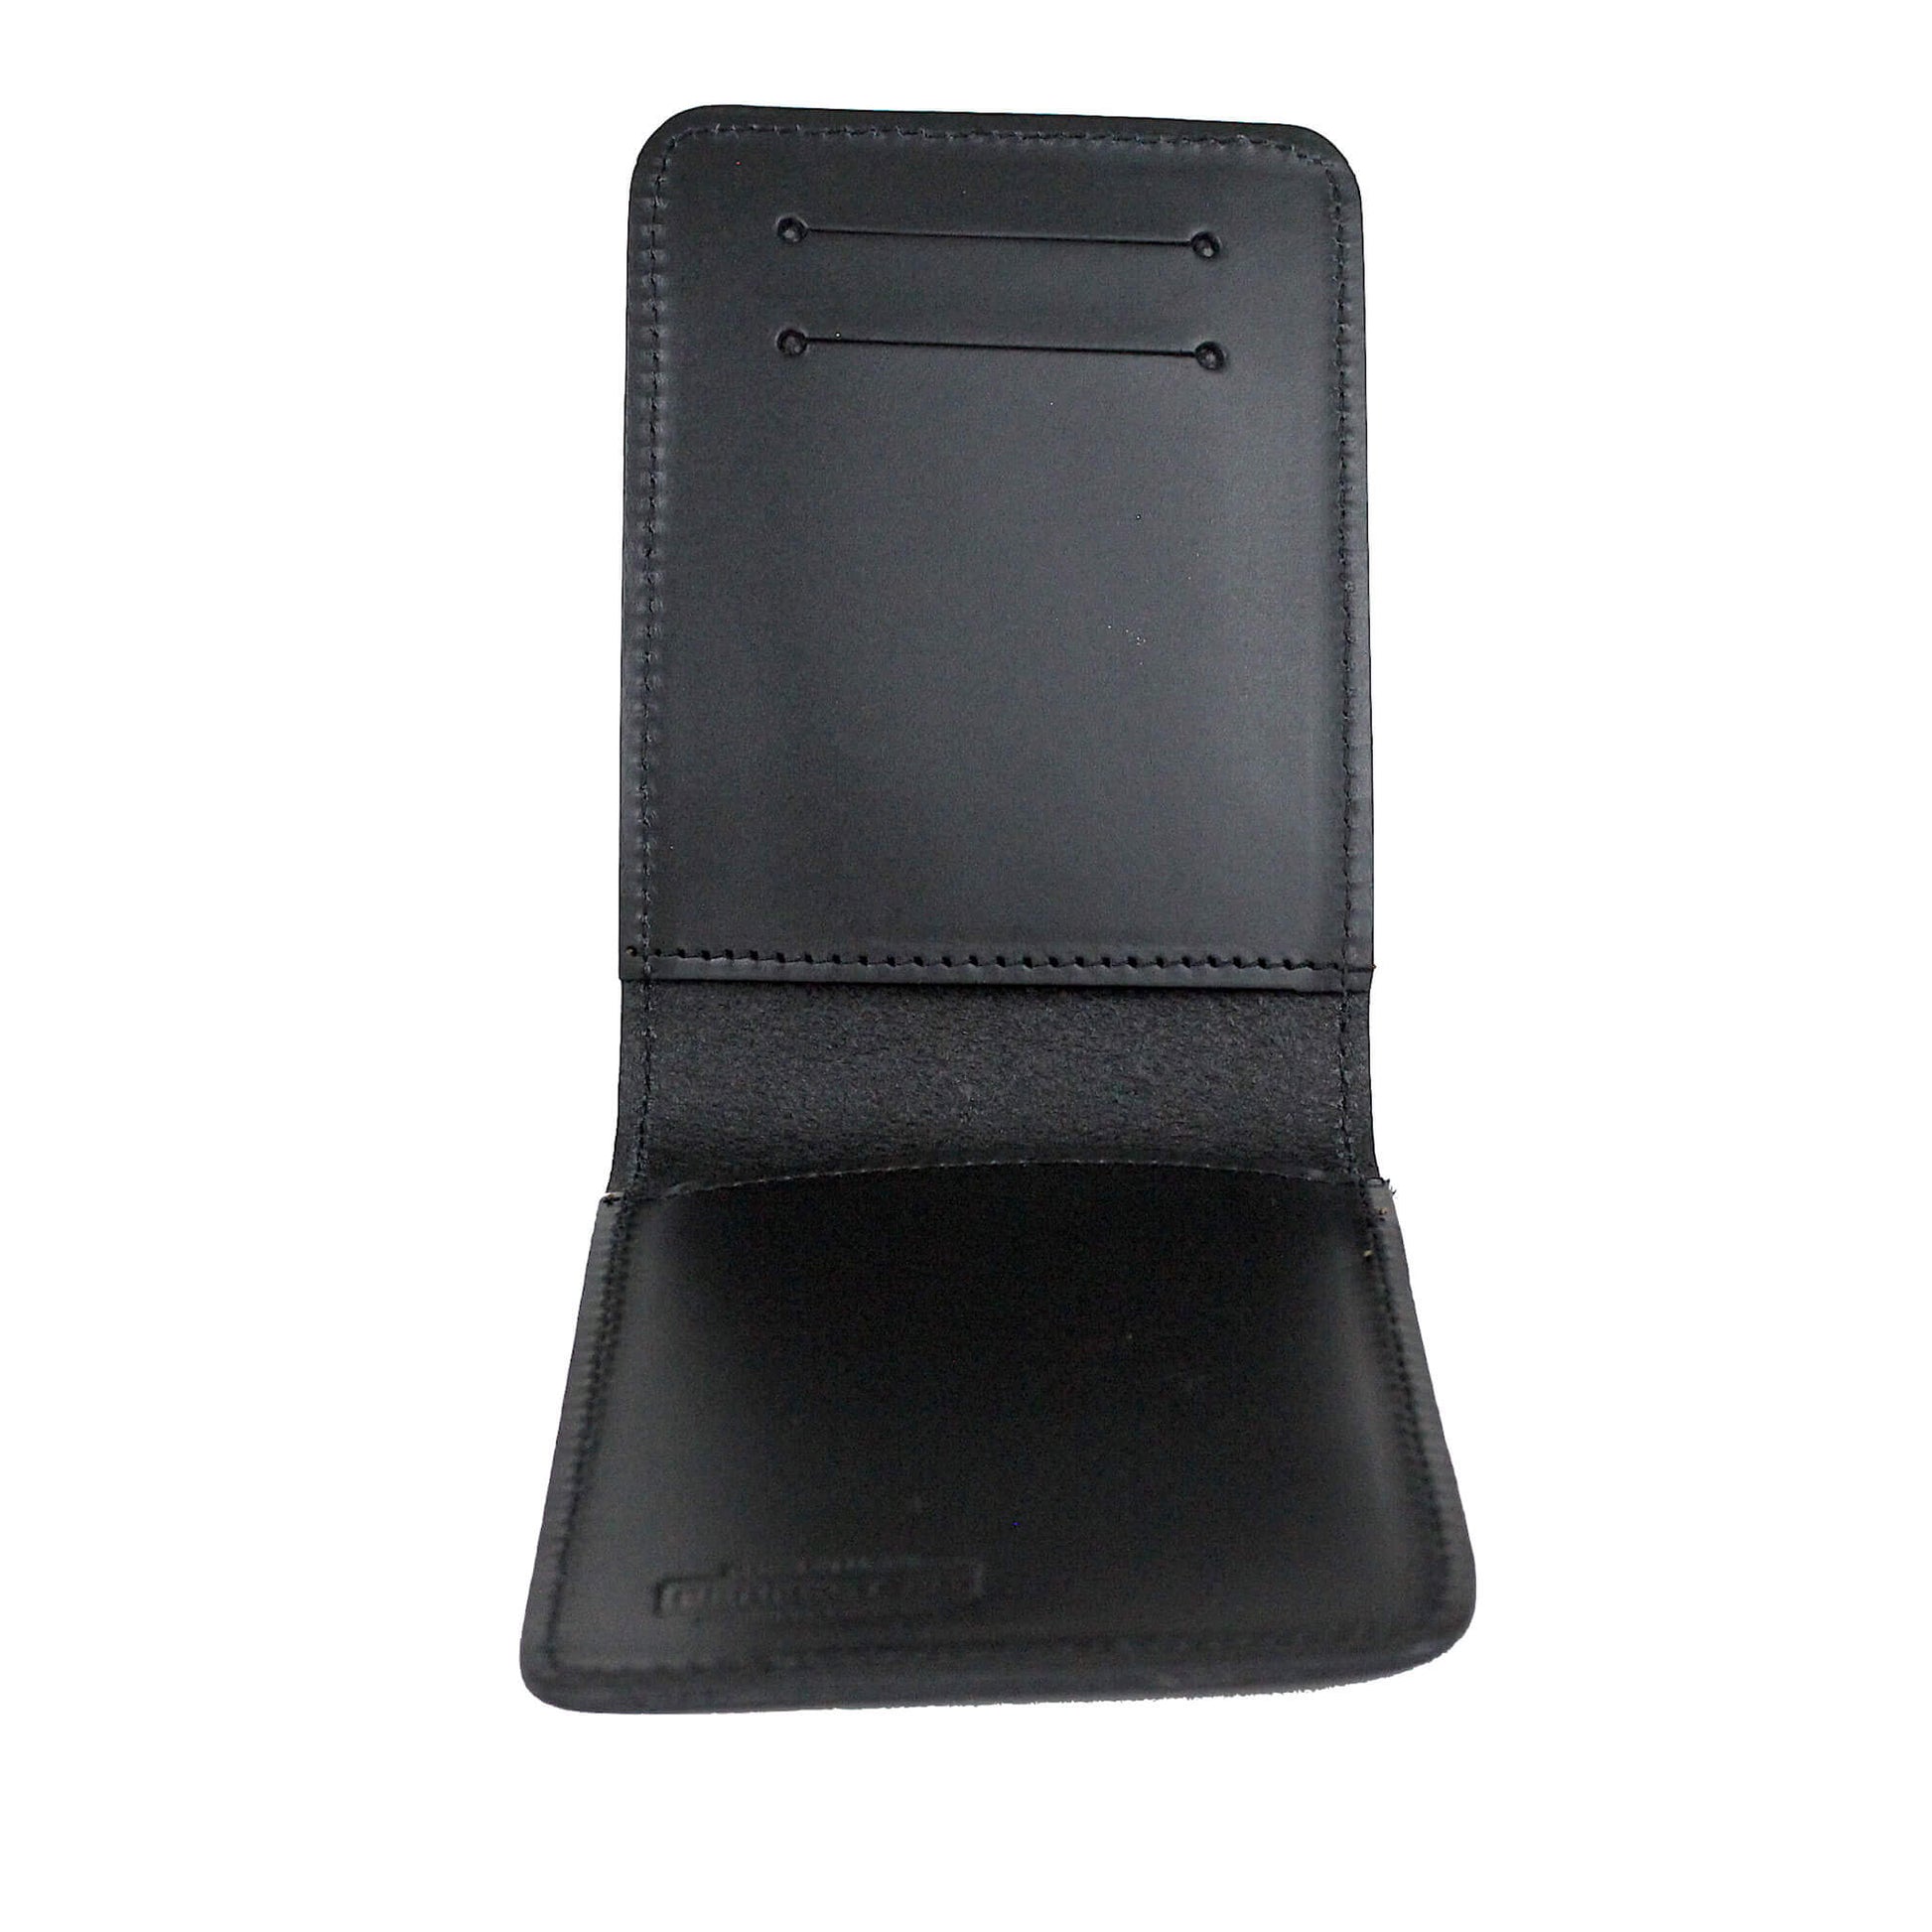 Sault Ste. Marie Police ESU Notebook Cover-Perfect Fit-911 Duty Gear Canada